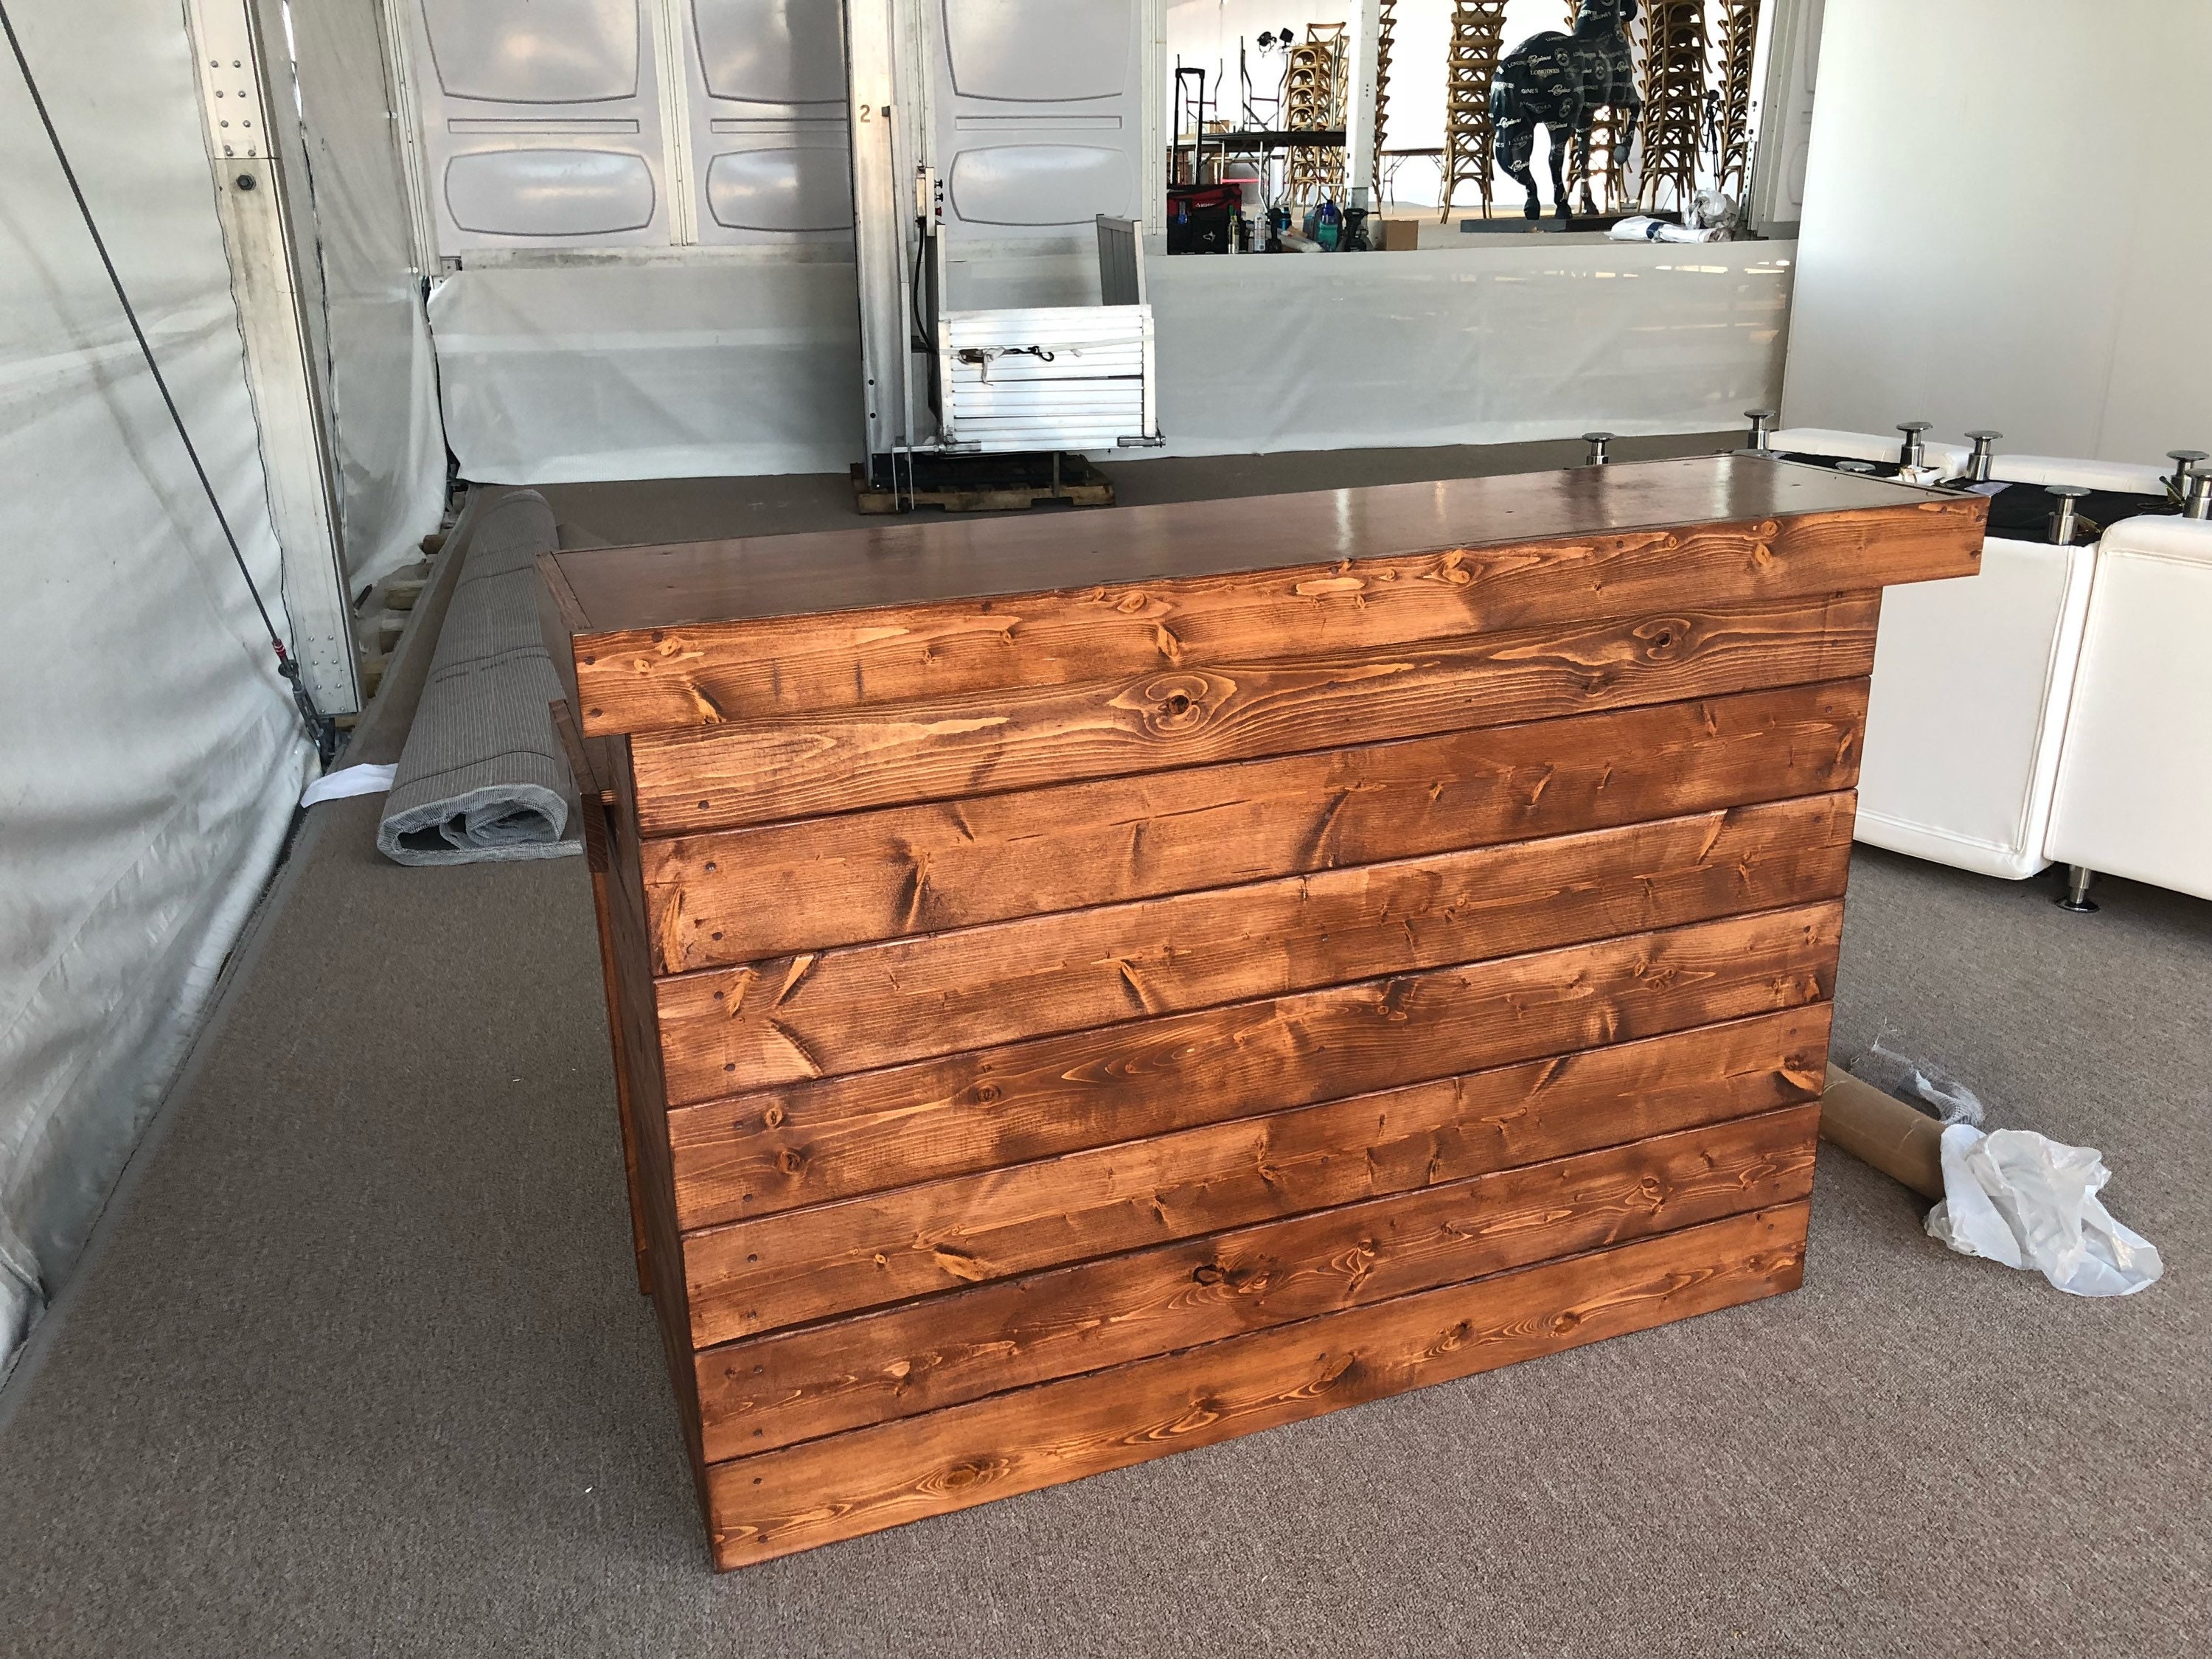 Custom Canyon Reception Desk 7 Foot Pallet Style Or Barn Wood